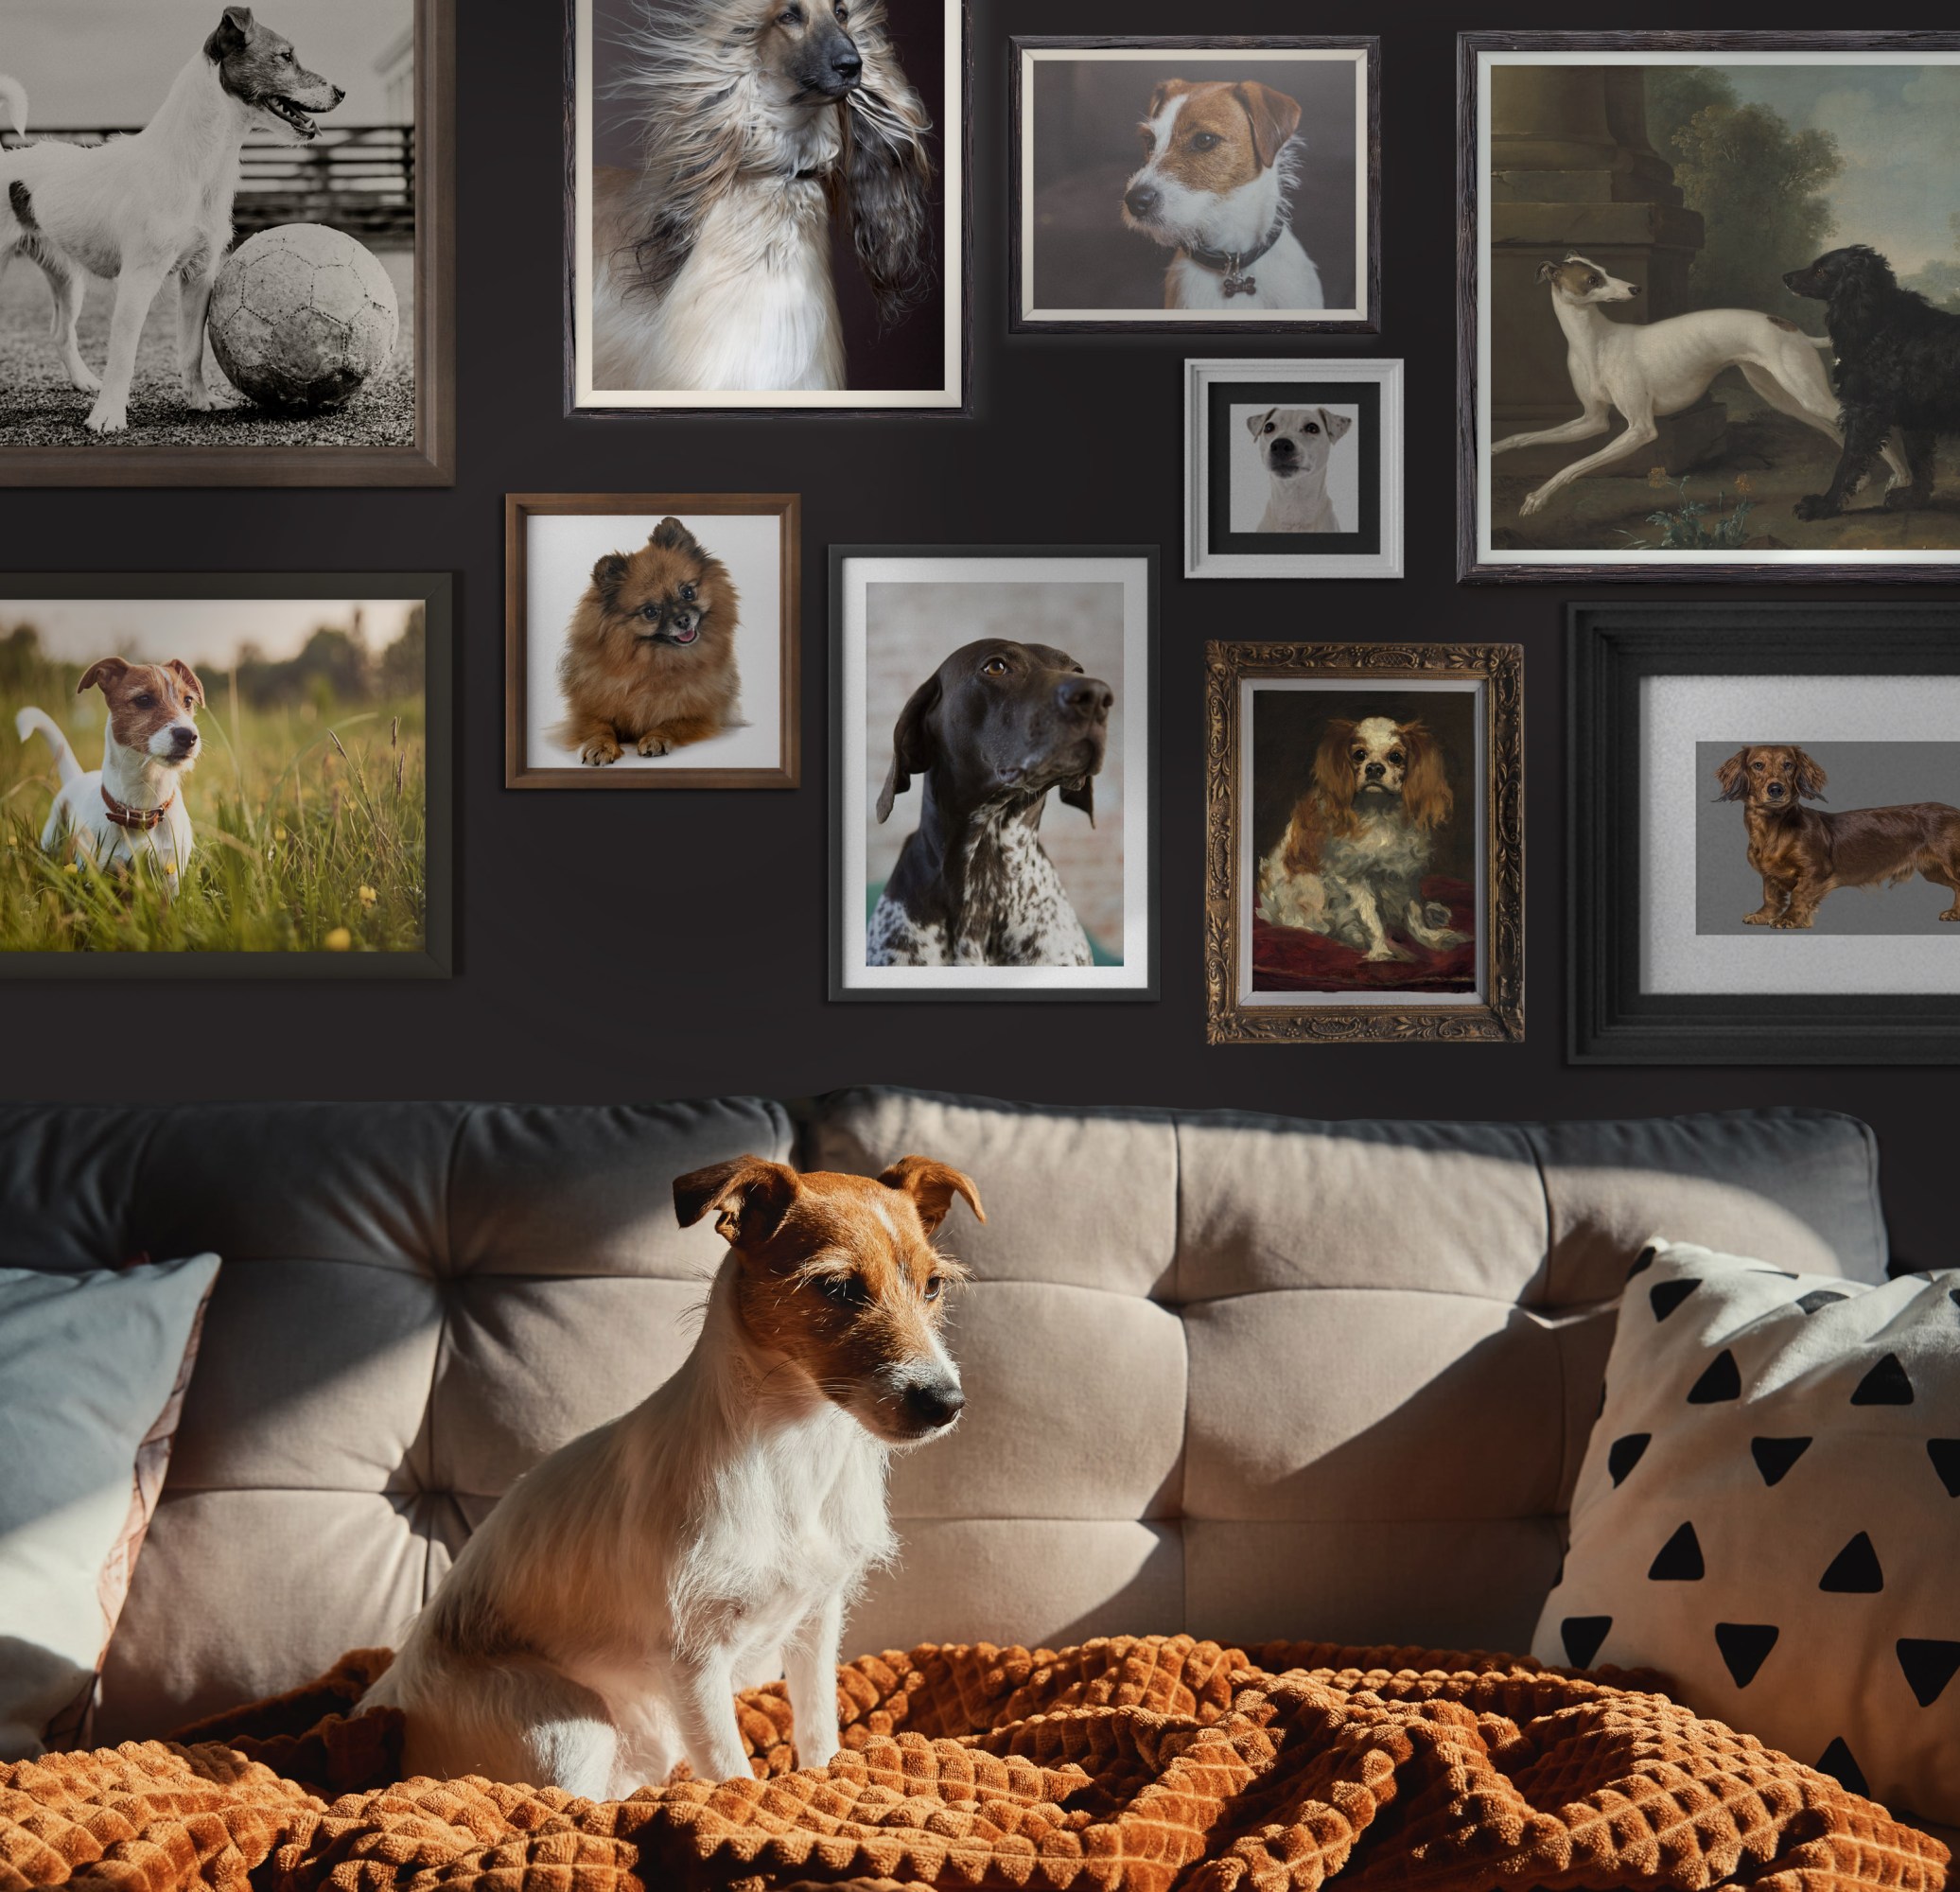 Conceptual illustration of a dog on a sofa with past dogs in a framed portrait behind